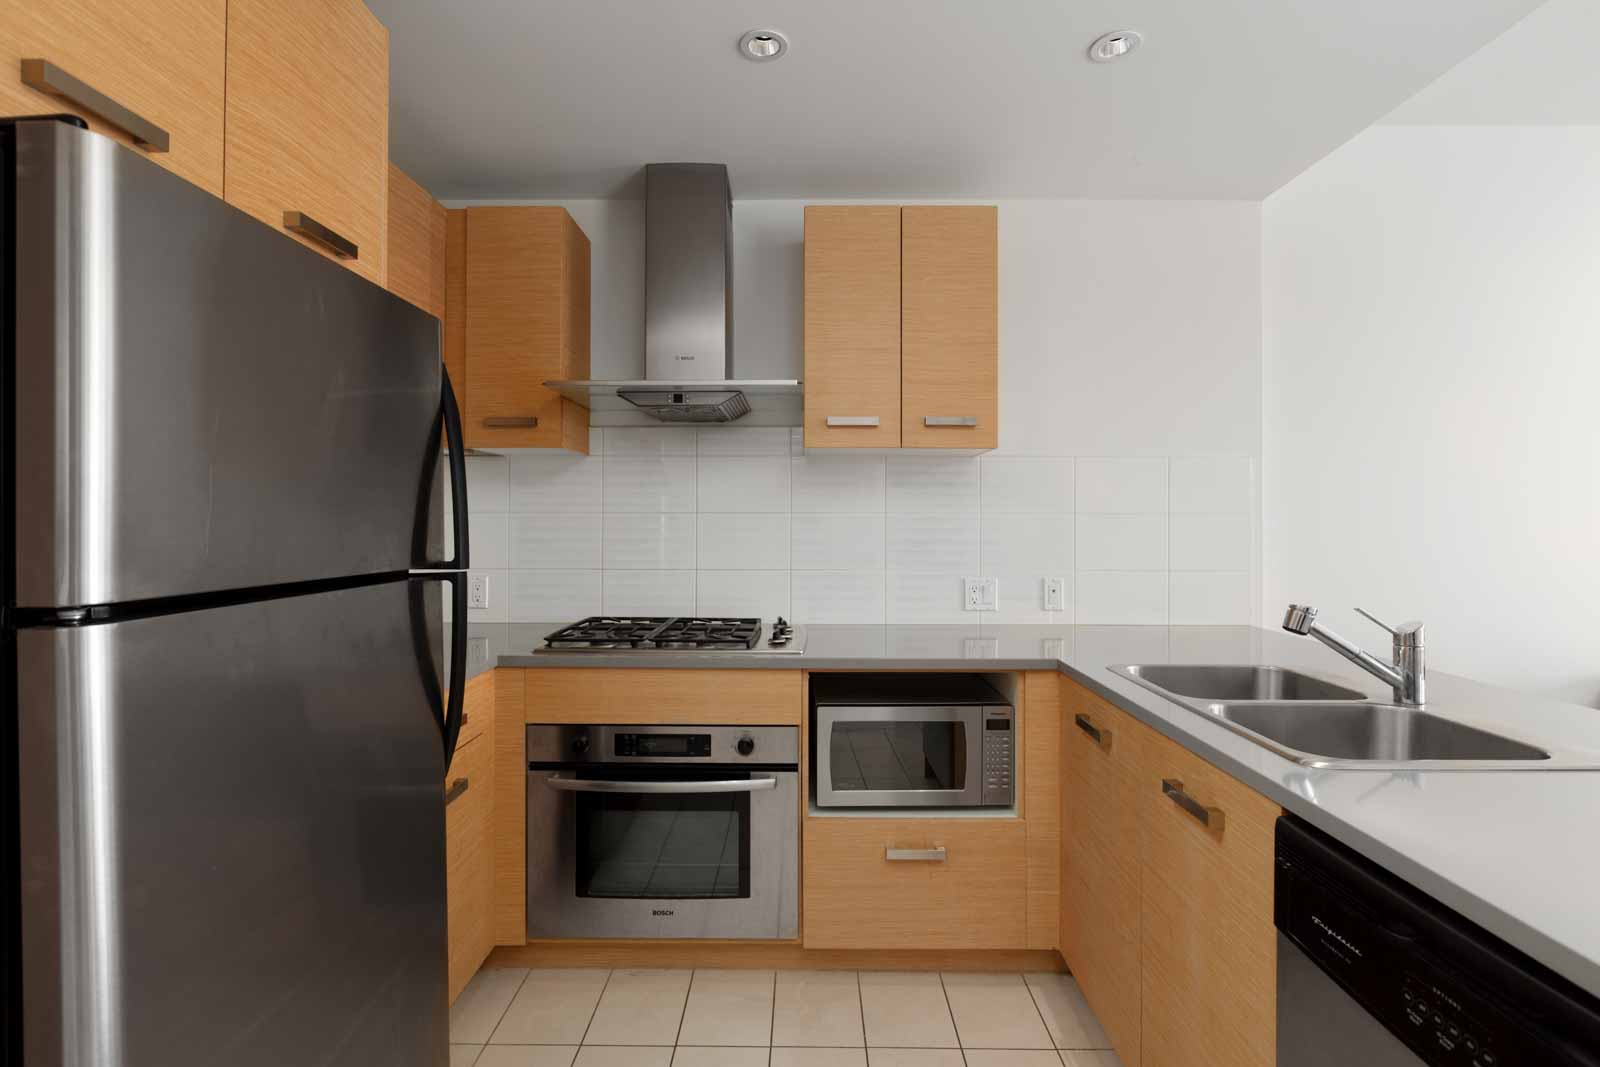 Open kitchen with high-end stainless steel appliances including oven, stove, refrigerator, and sink, with plenty of counter and storage space in a rental condo in Richmond offered by Birds Nest Properties